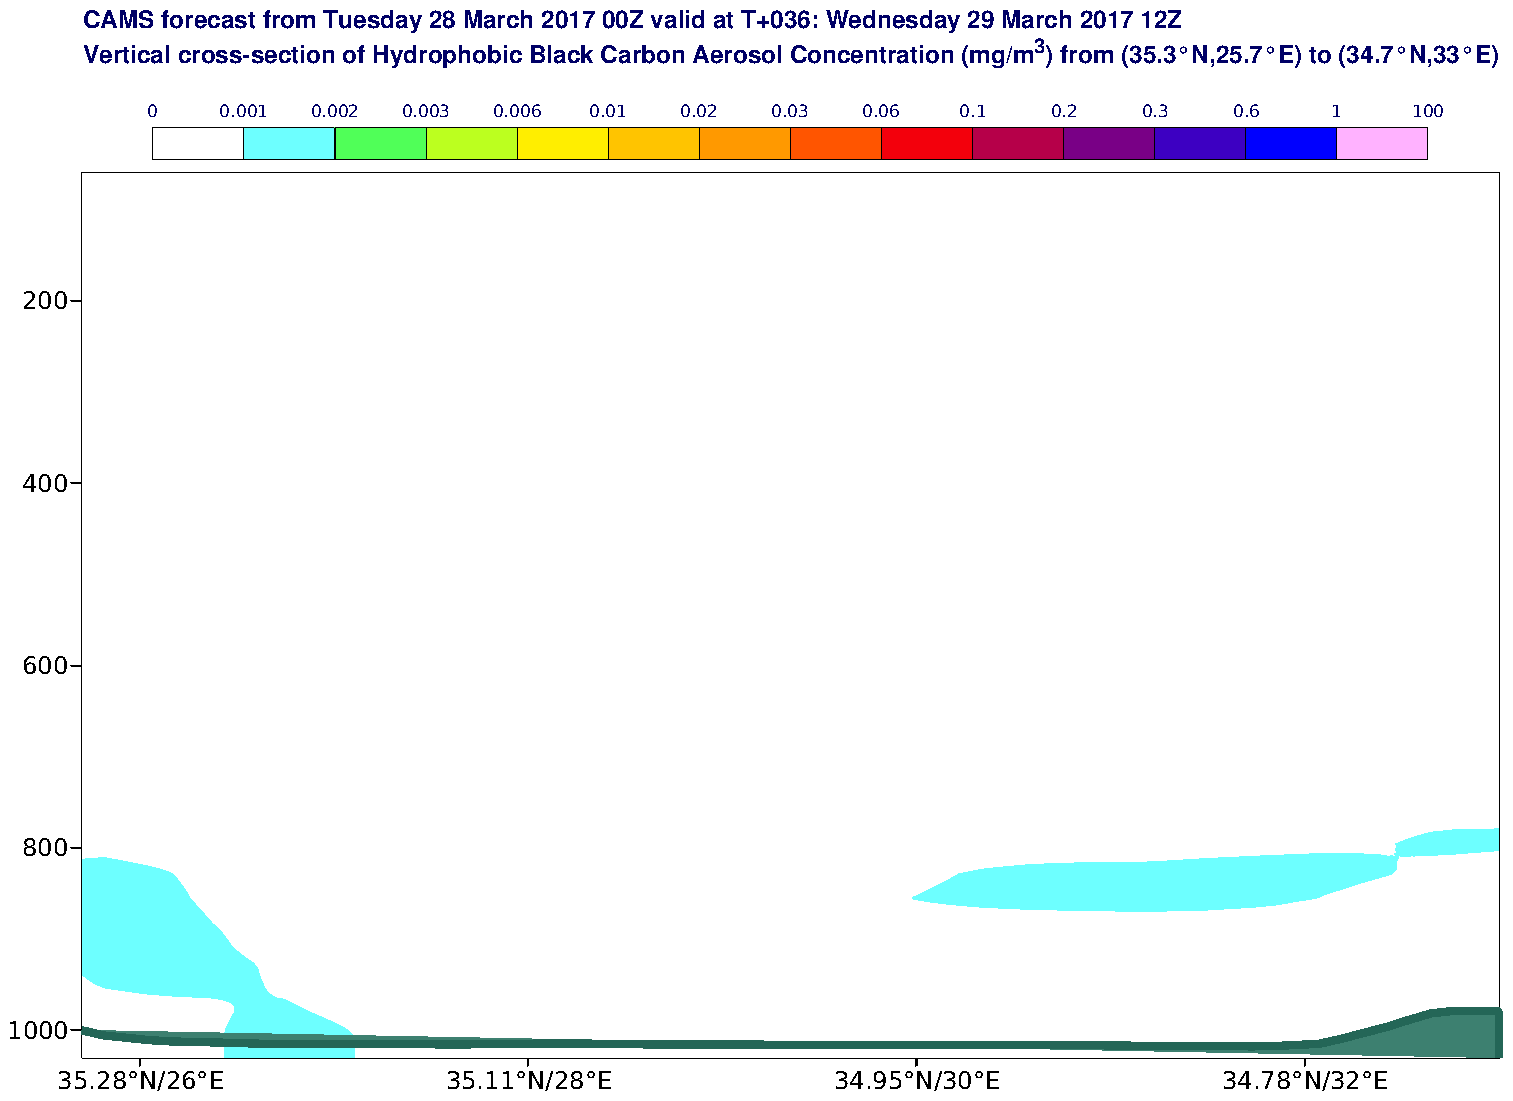 Vertical cross-section of Hydrophobic Black Carbon Aerosol Concentration (mg/m3) valid at T36 - 2017-03-29 12:00